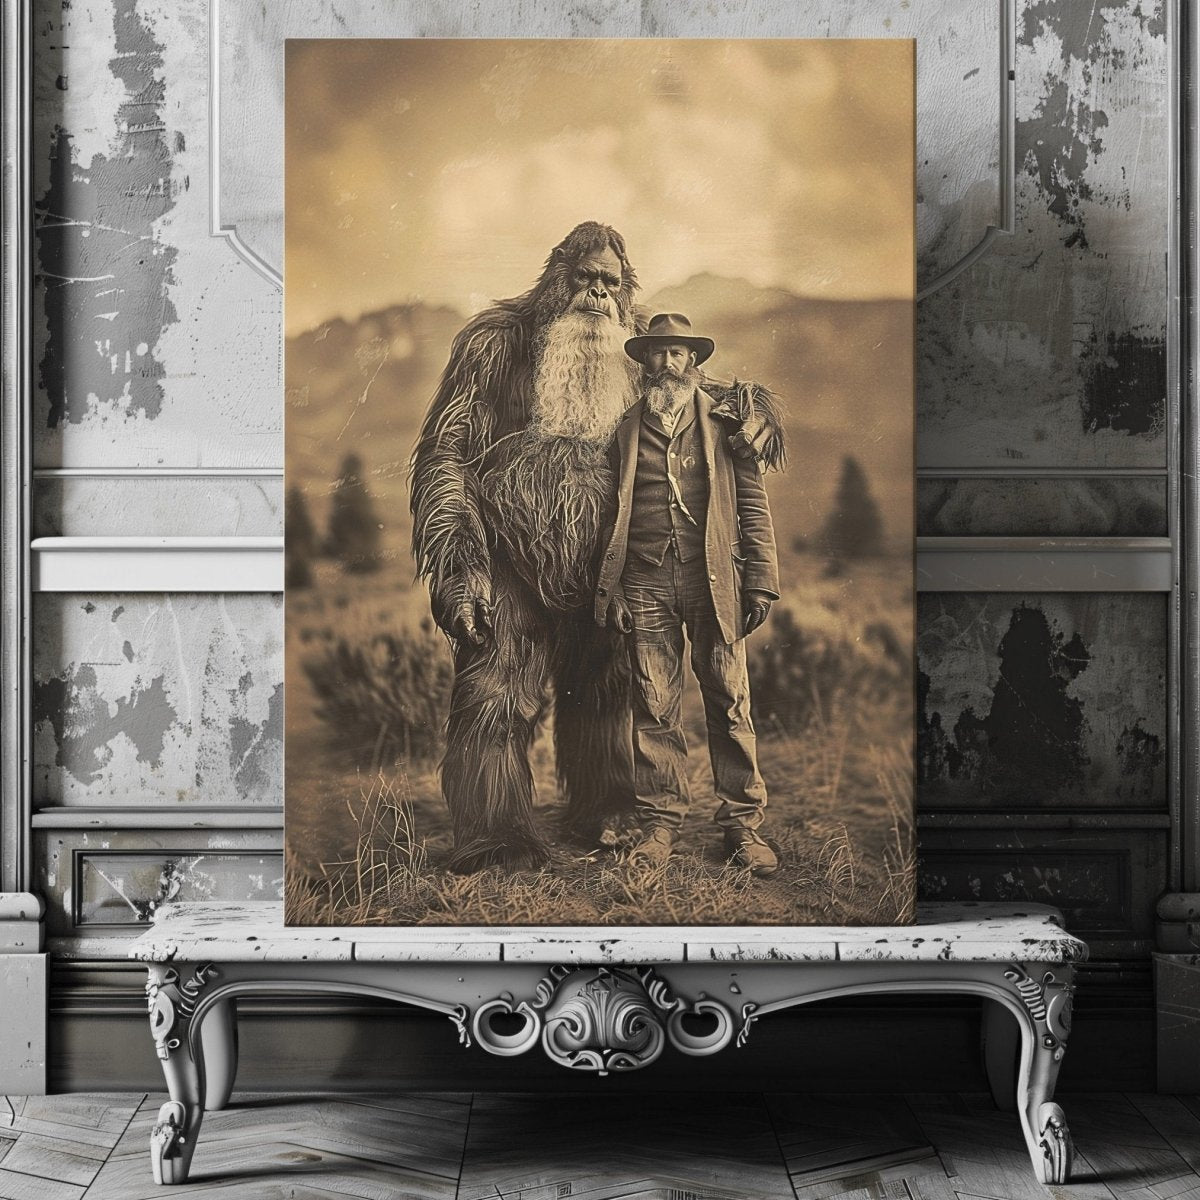 Vintage Canvas Wall Art Print of Settler and Bigfoot in the 19th Century - Cryptid Photo Print for Unique Decor - Everything Pixel